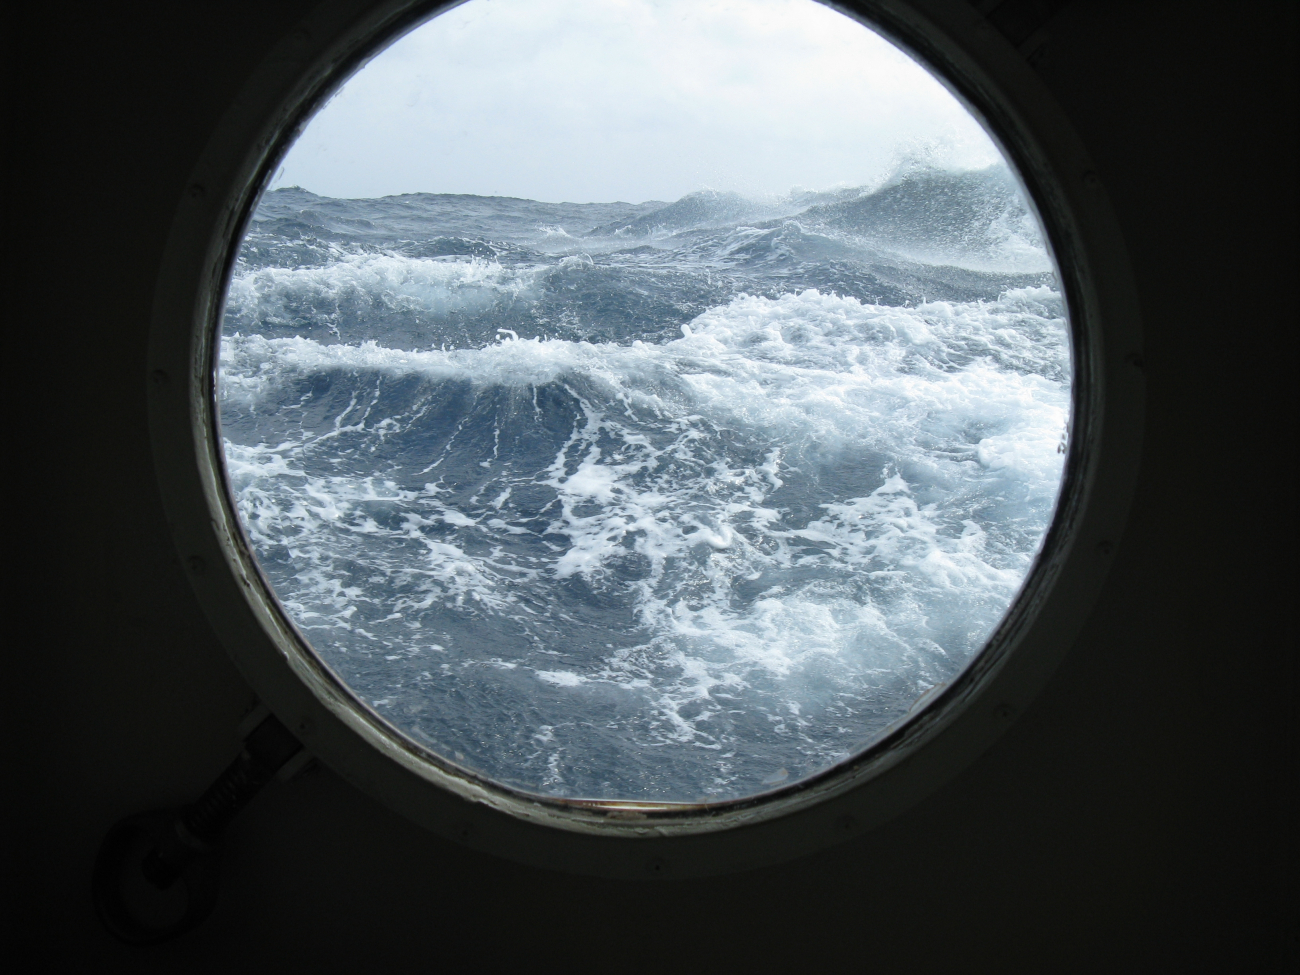 Porthole view of rough seas in the Gulf of Mexico